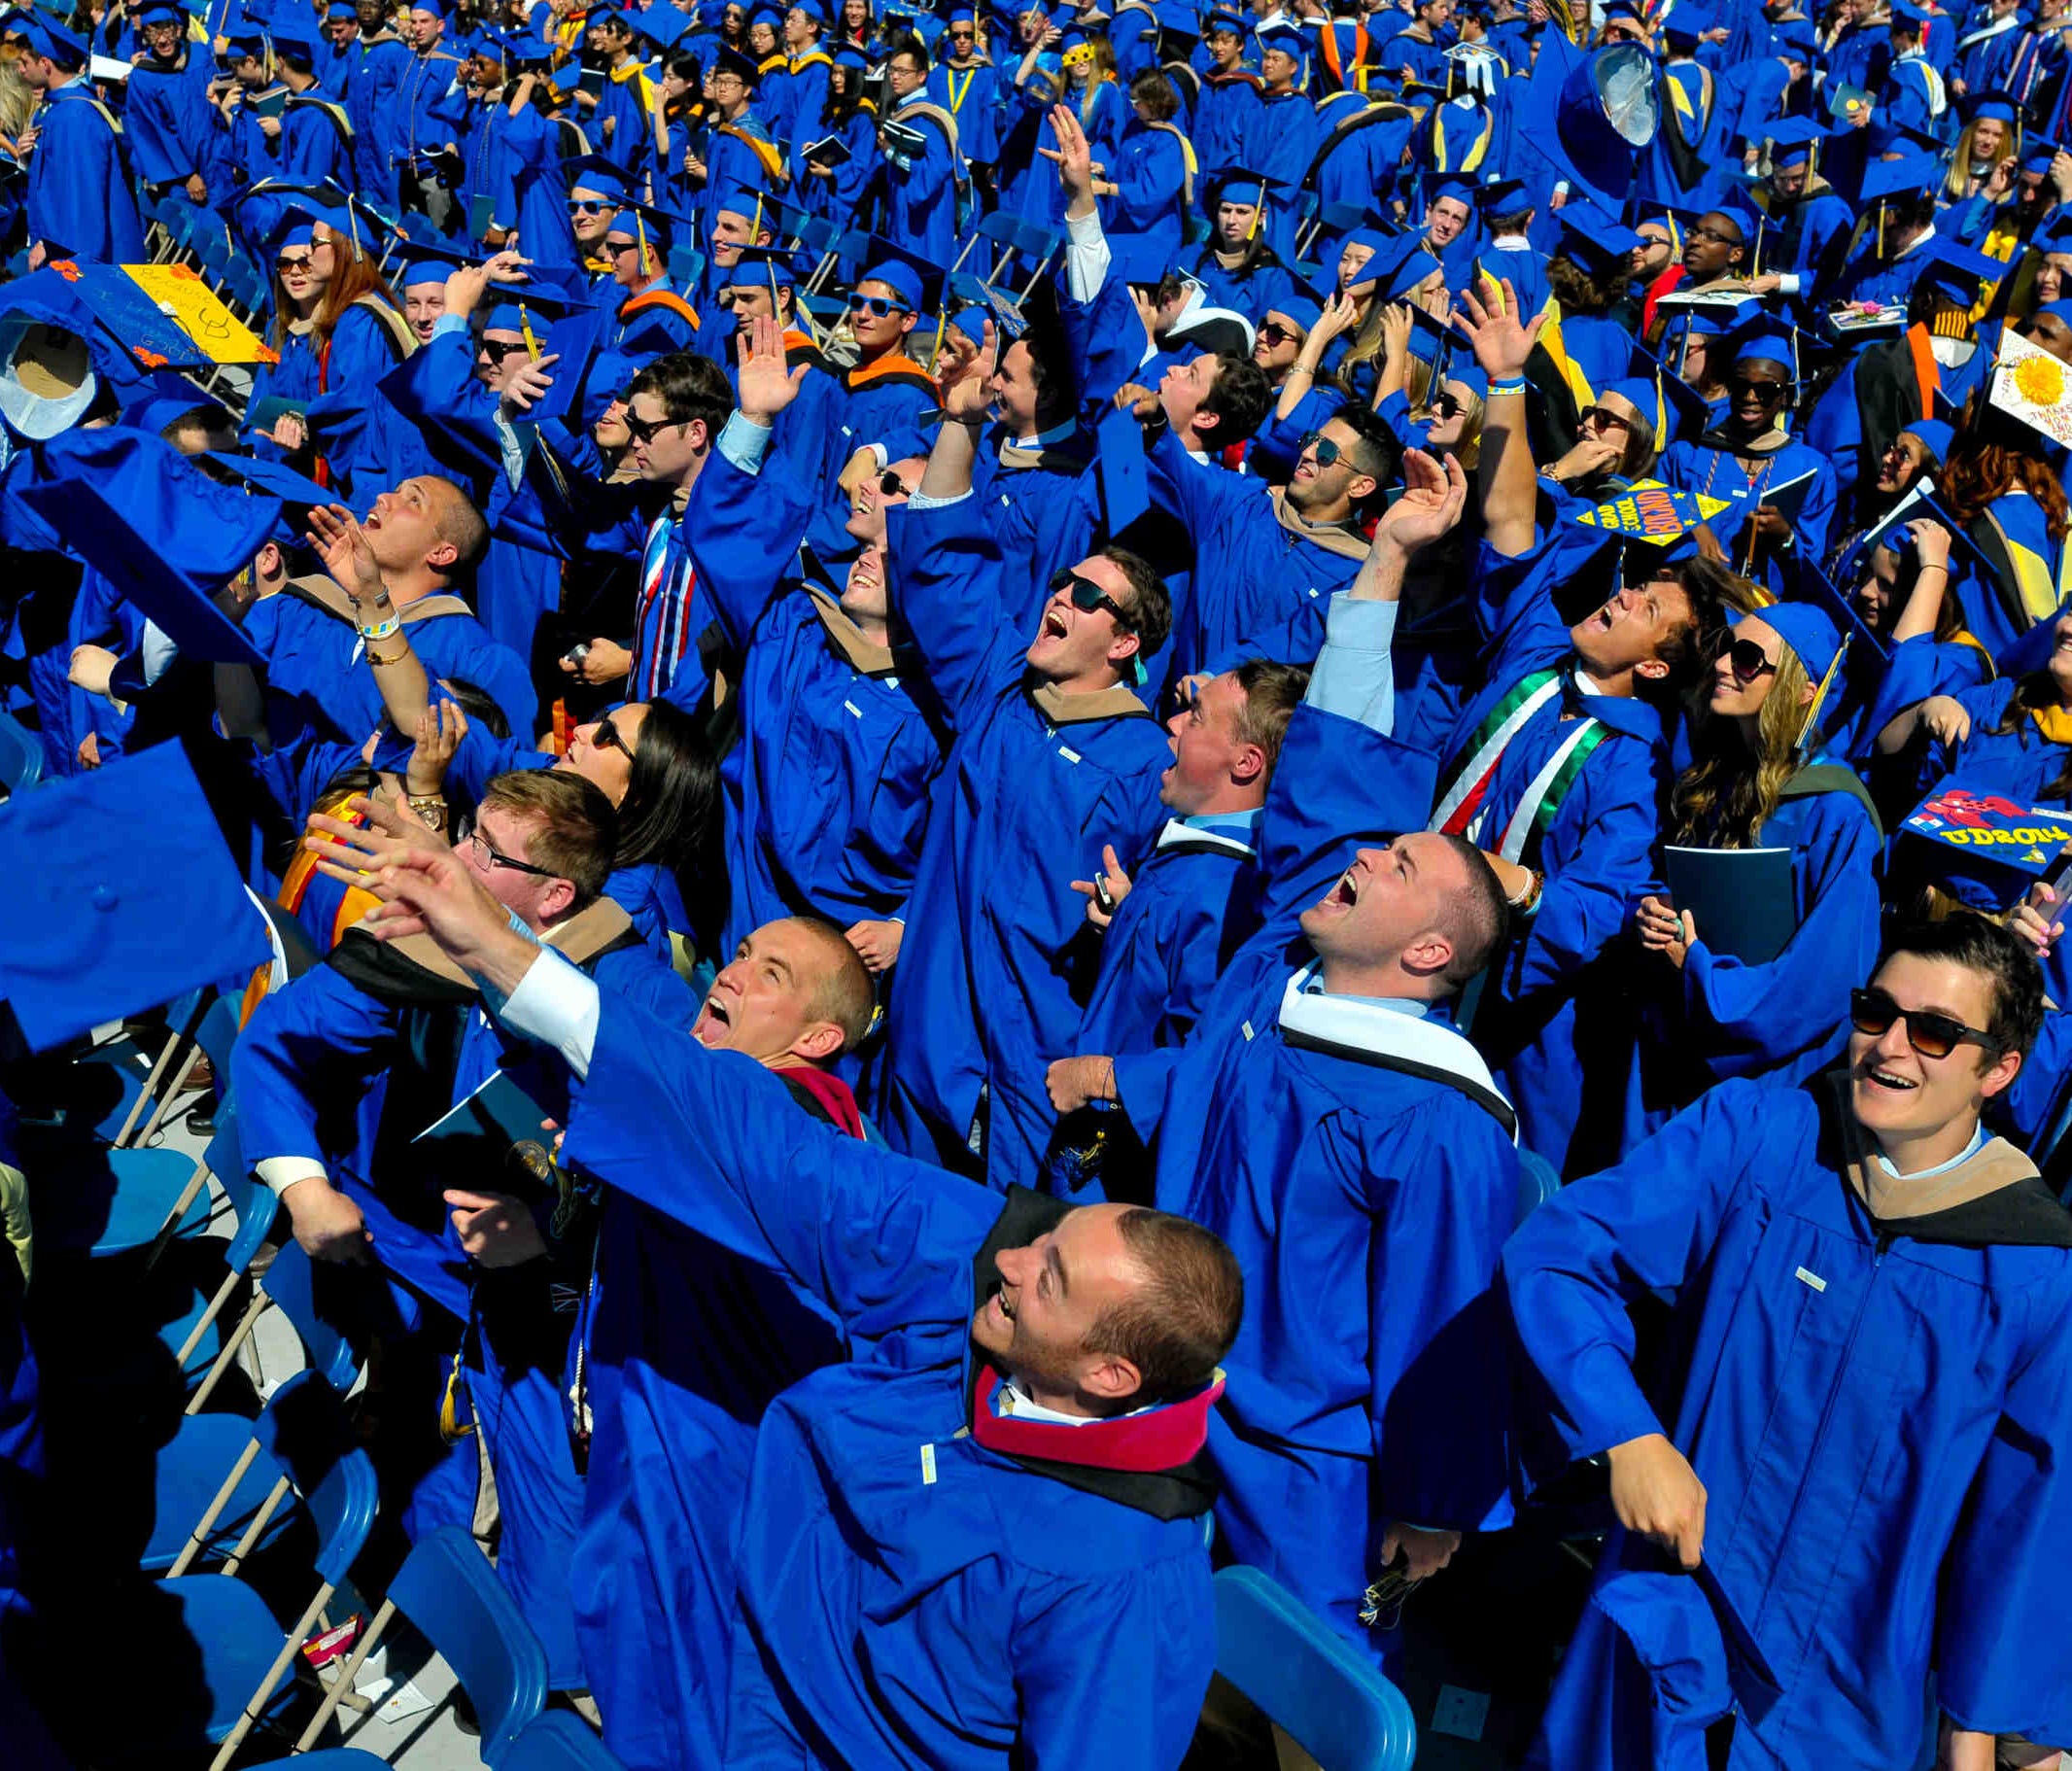 In this May 31, 2014 photo, graduates throw their caps in the air in triumph at the University of Delaware's commencement ceremony in Newark, Del.     (AP Photo/Emily Varisco)